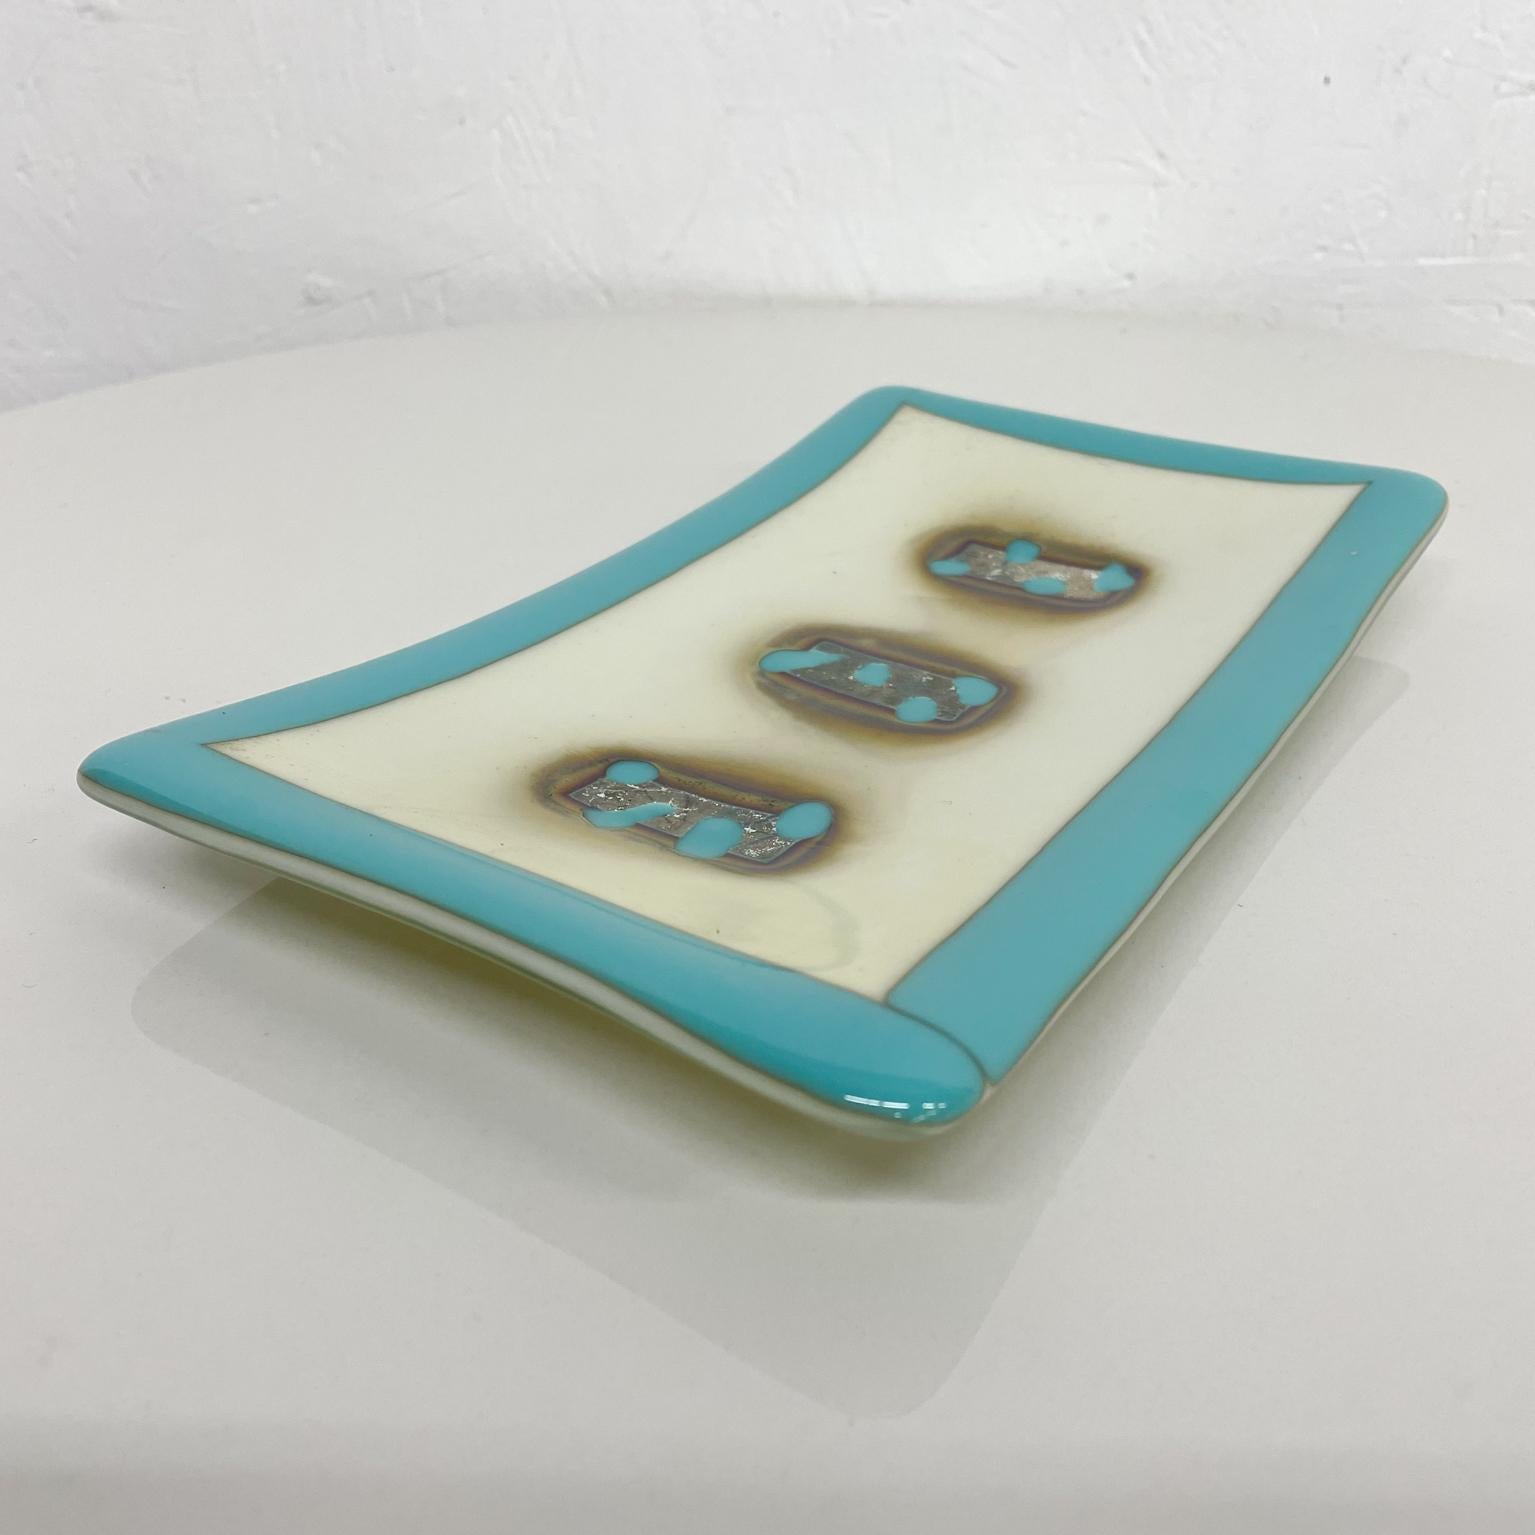 Stunning Art Glass Blue and White Decorative Dish Abstract Modern Design 1960s In Good Condition For Sale In Chula Vista, CA